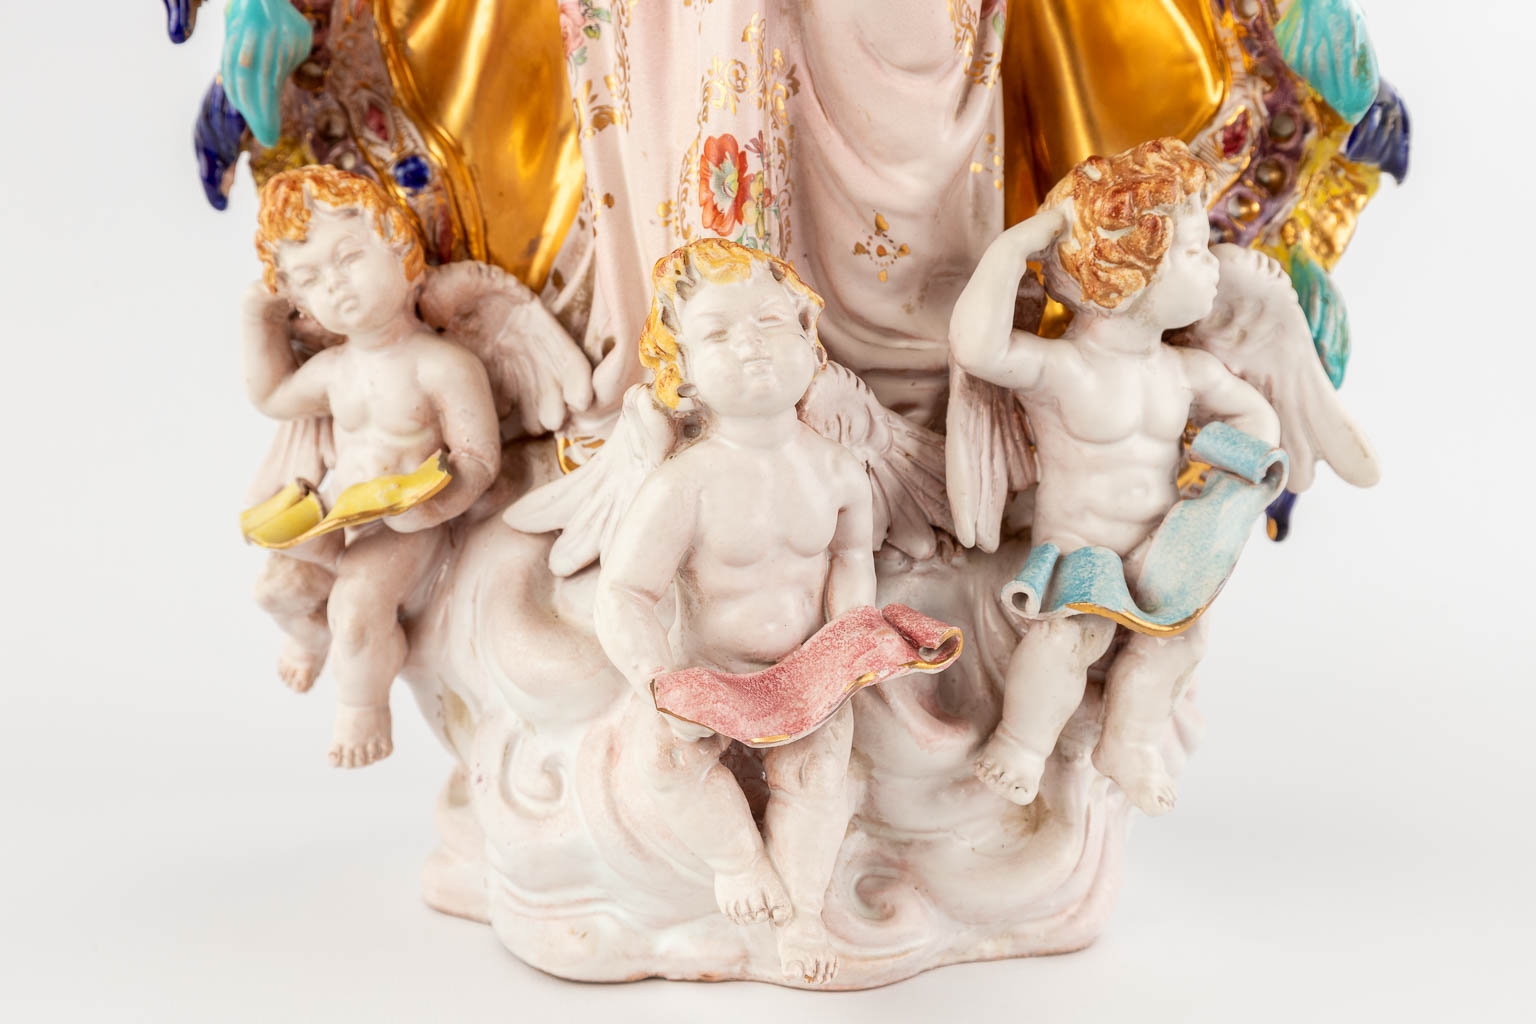 Paolo MARIONI (XX) A large polychrome terracotta figurine of Madonna with children, 20th C. (D:18 x W:31 x H:65 cm)